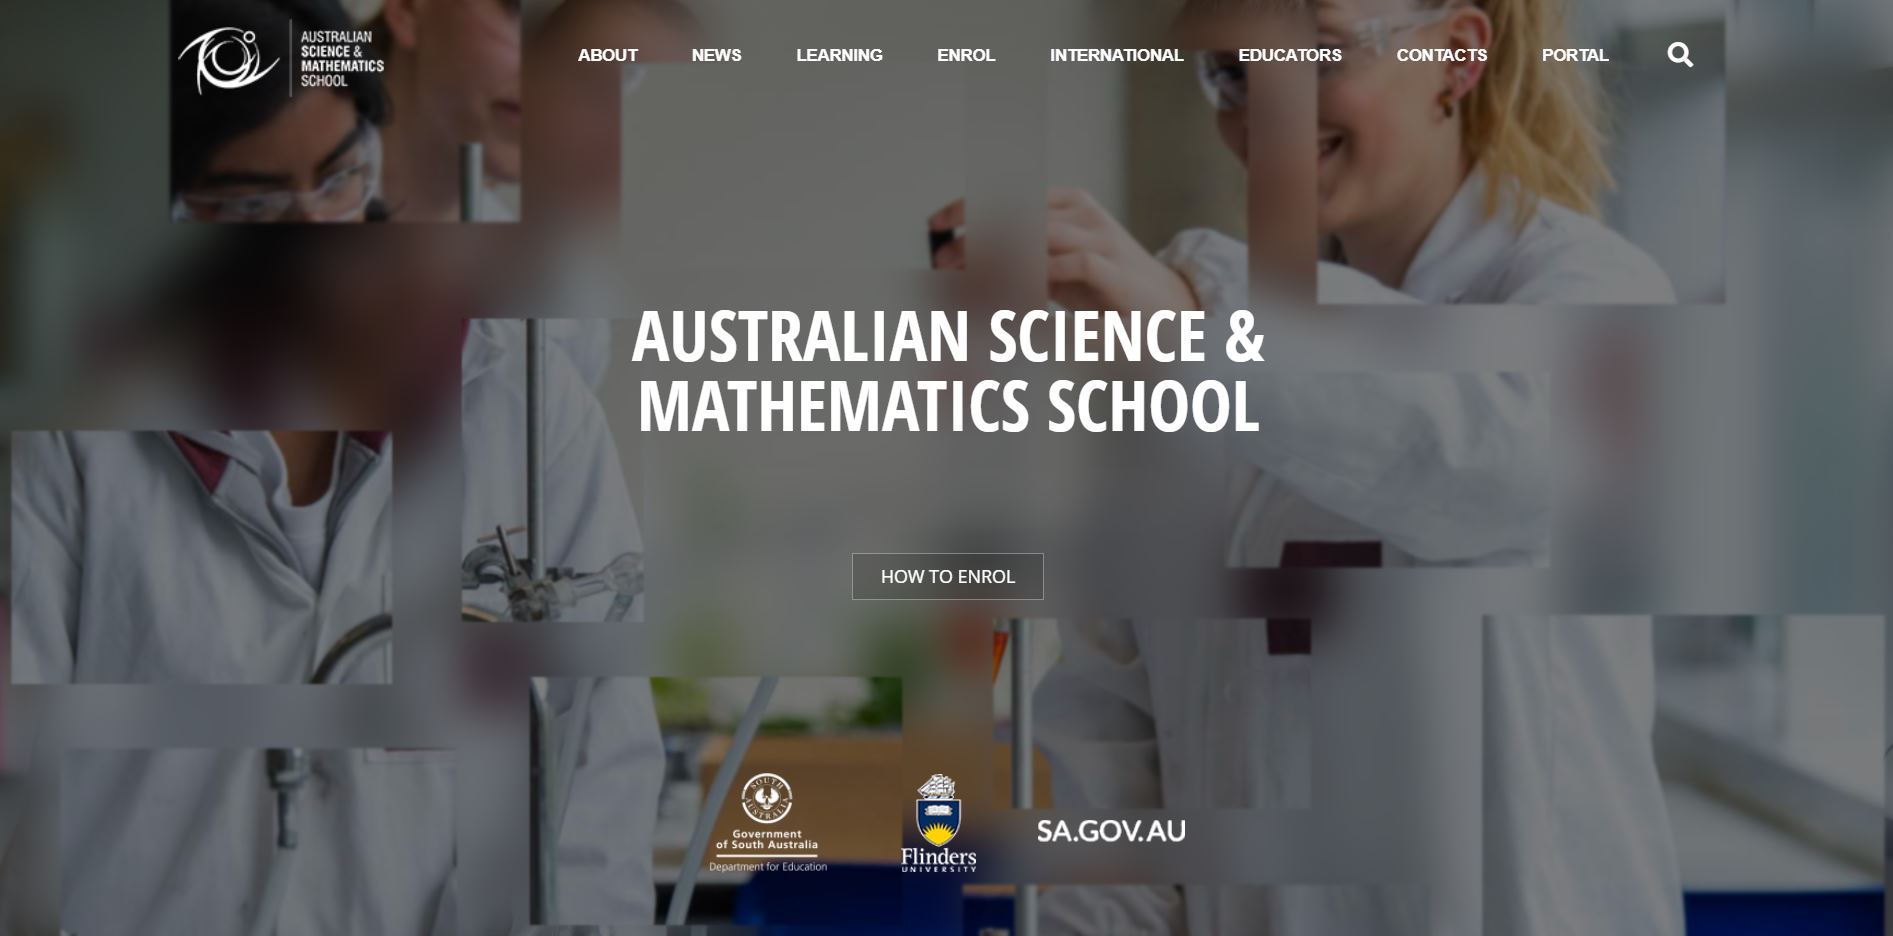 ASMS website, with menu and image of children